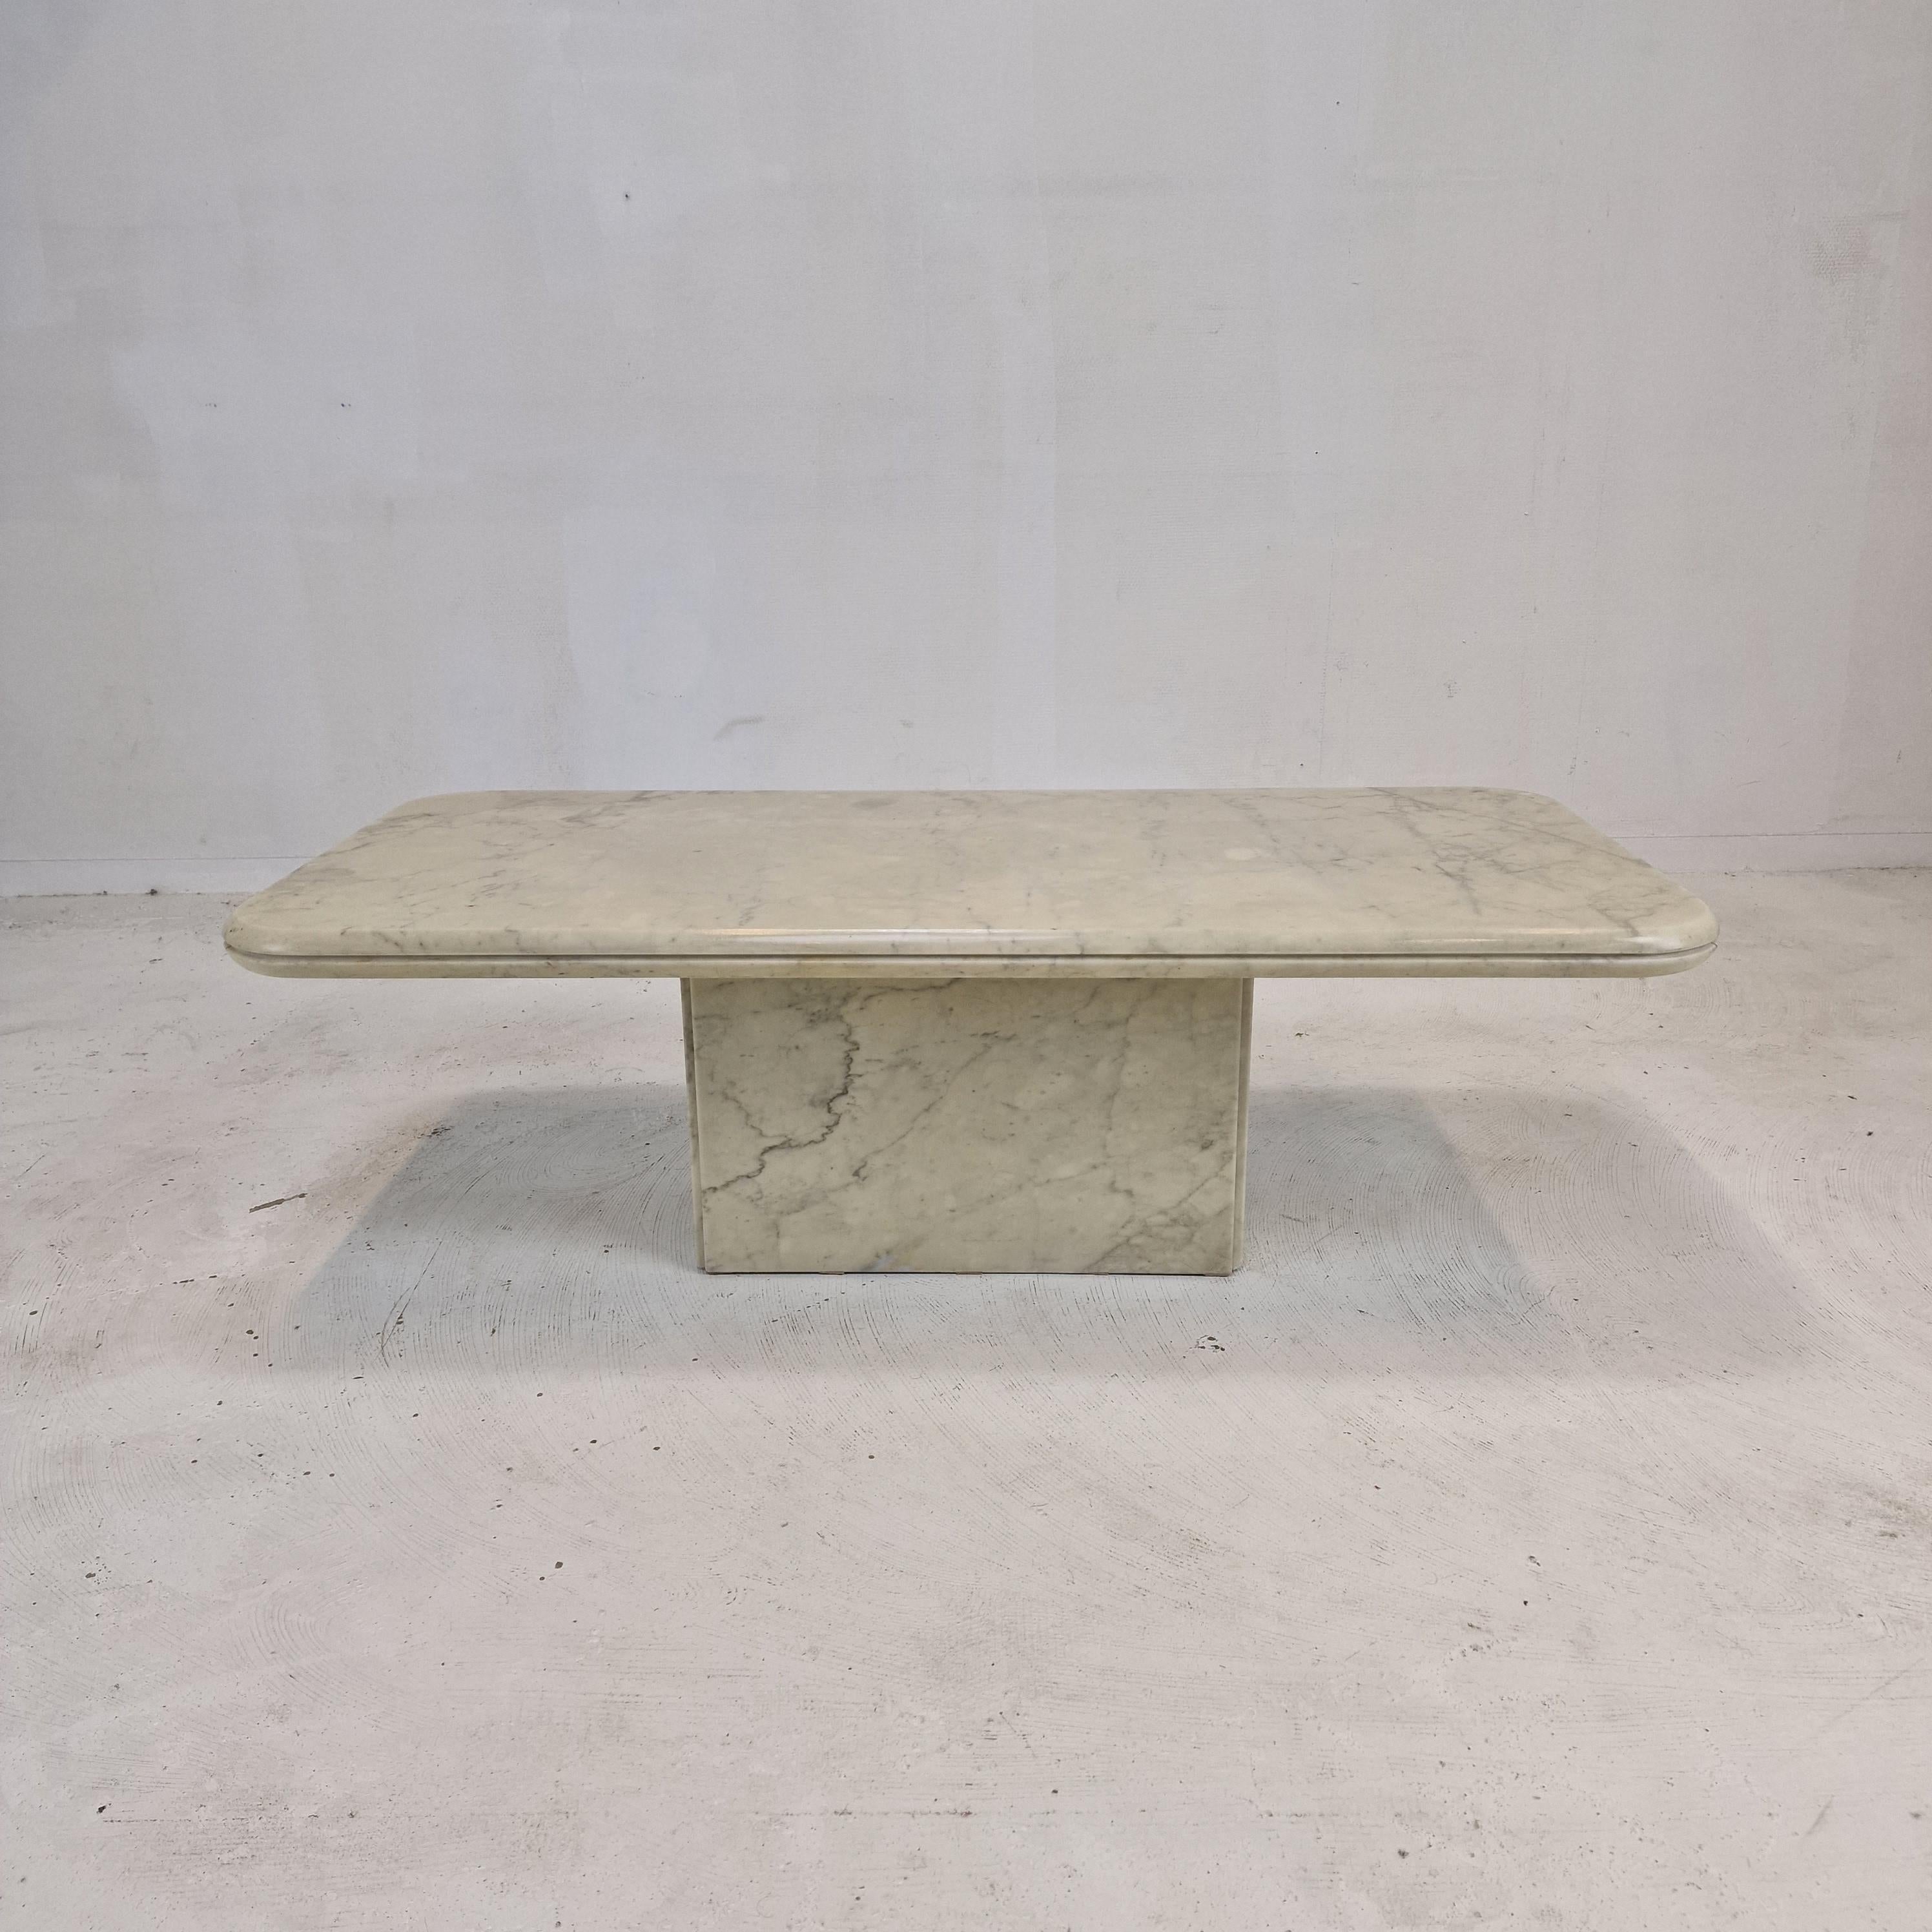 Very nice Italian coffee table handcrafted out of marble, 1970's.

The rectangle top and base are made of very beautiful marble.
The fabulous marble features a very nice pattern of different colors.

It has the normal traces of use, see the